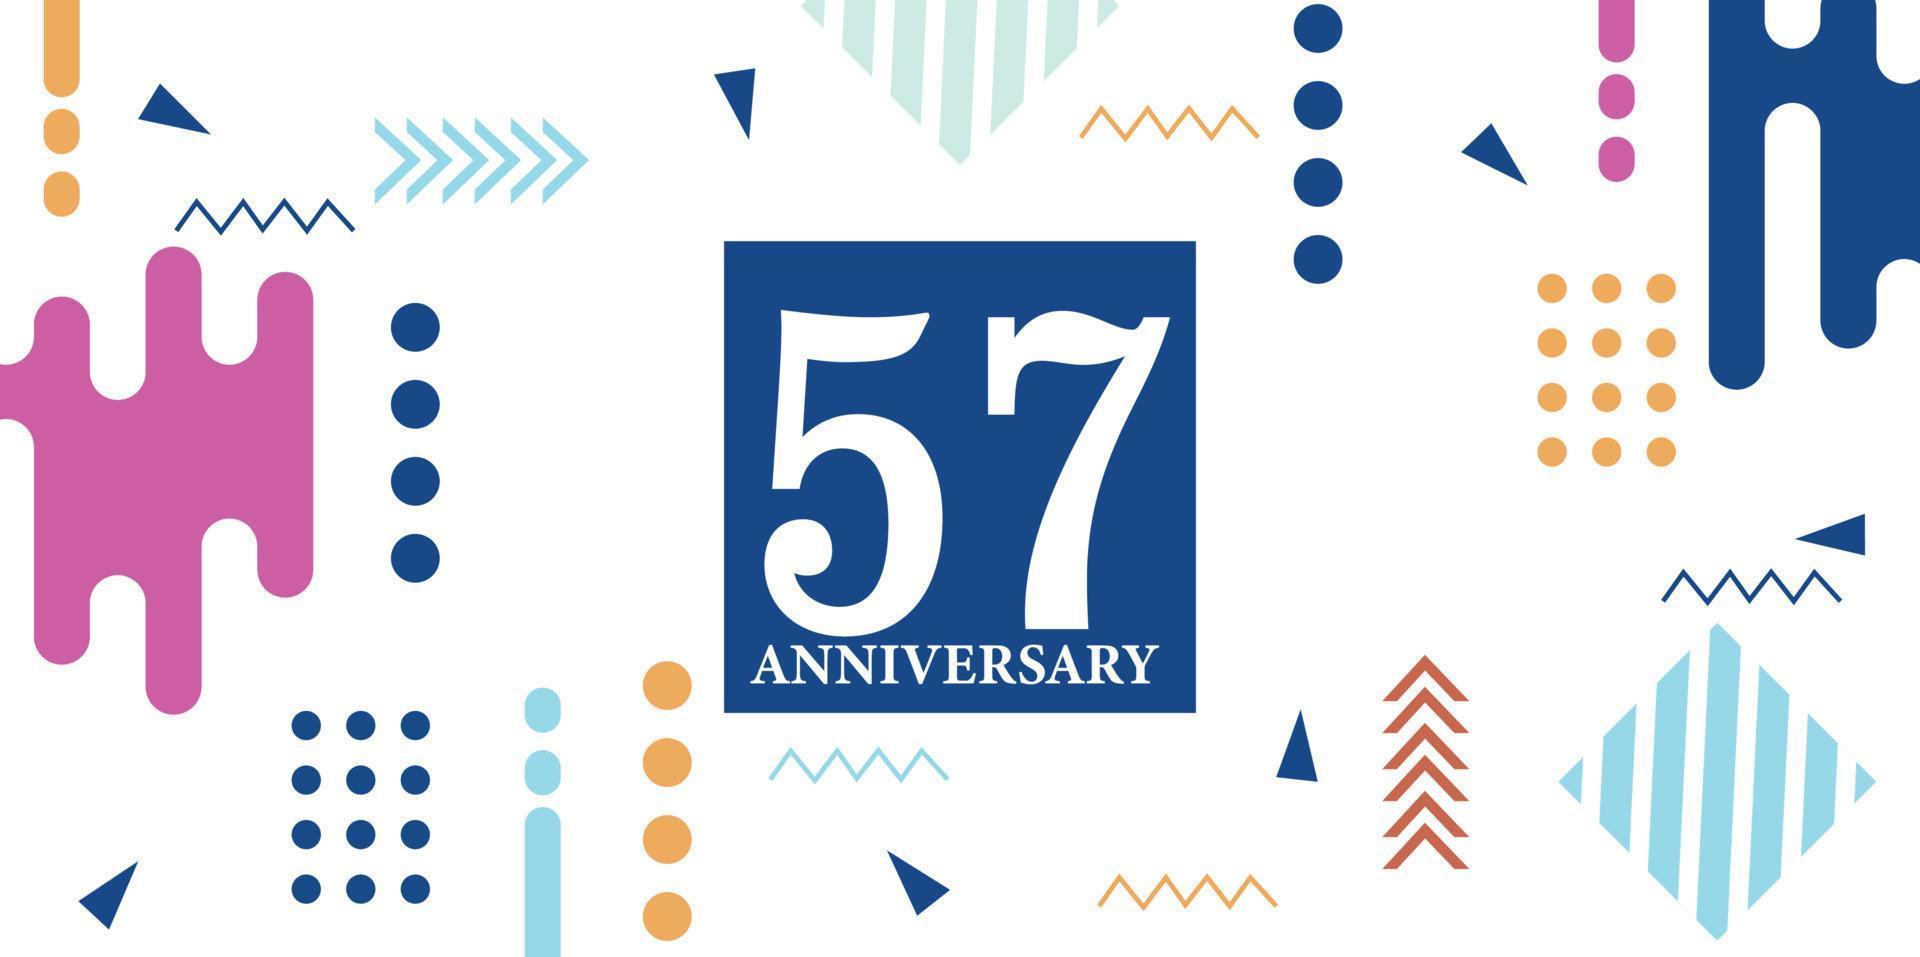 57 years anniversary celebration logotype white numbers font in blue shape with colorful abstract design on white background vector illustration